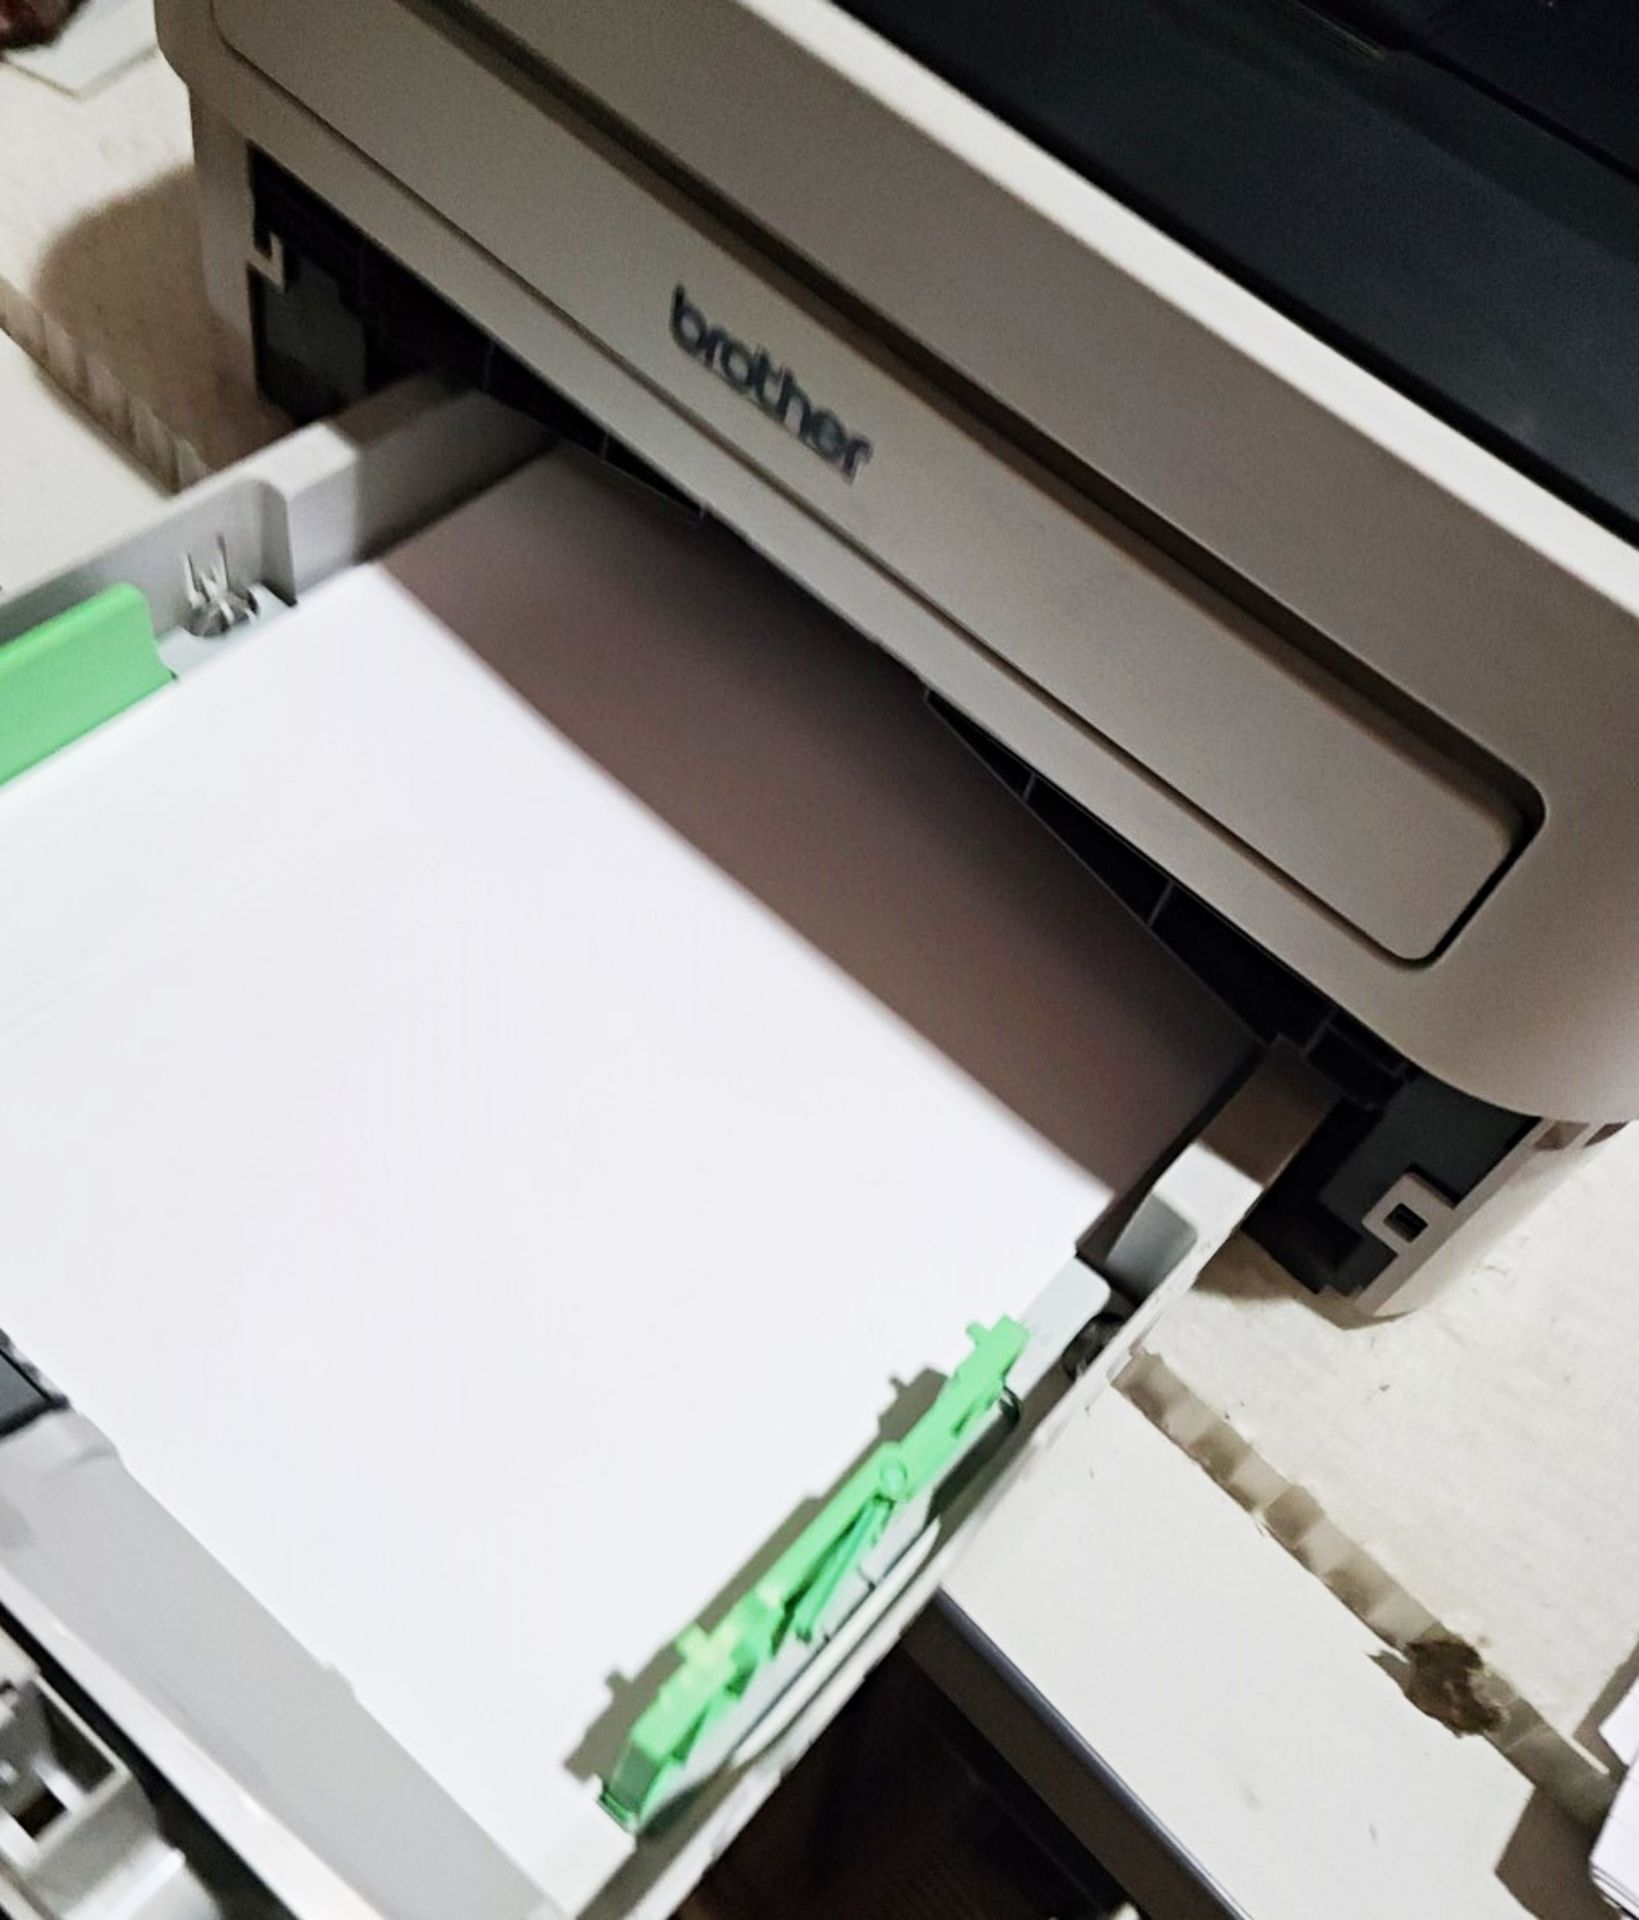 1 x Brother Printer MFC -9140CDN A4 Colour Multifunction Printer/Scanner/Copy/Fax Machine - Image 5 of 7